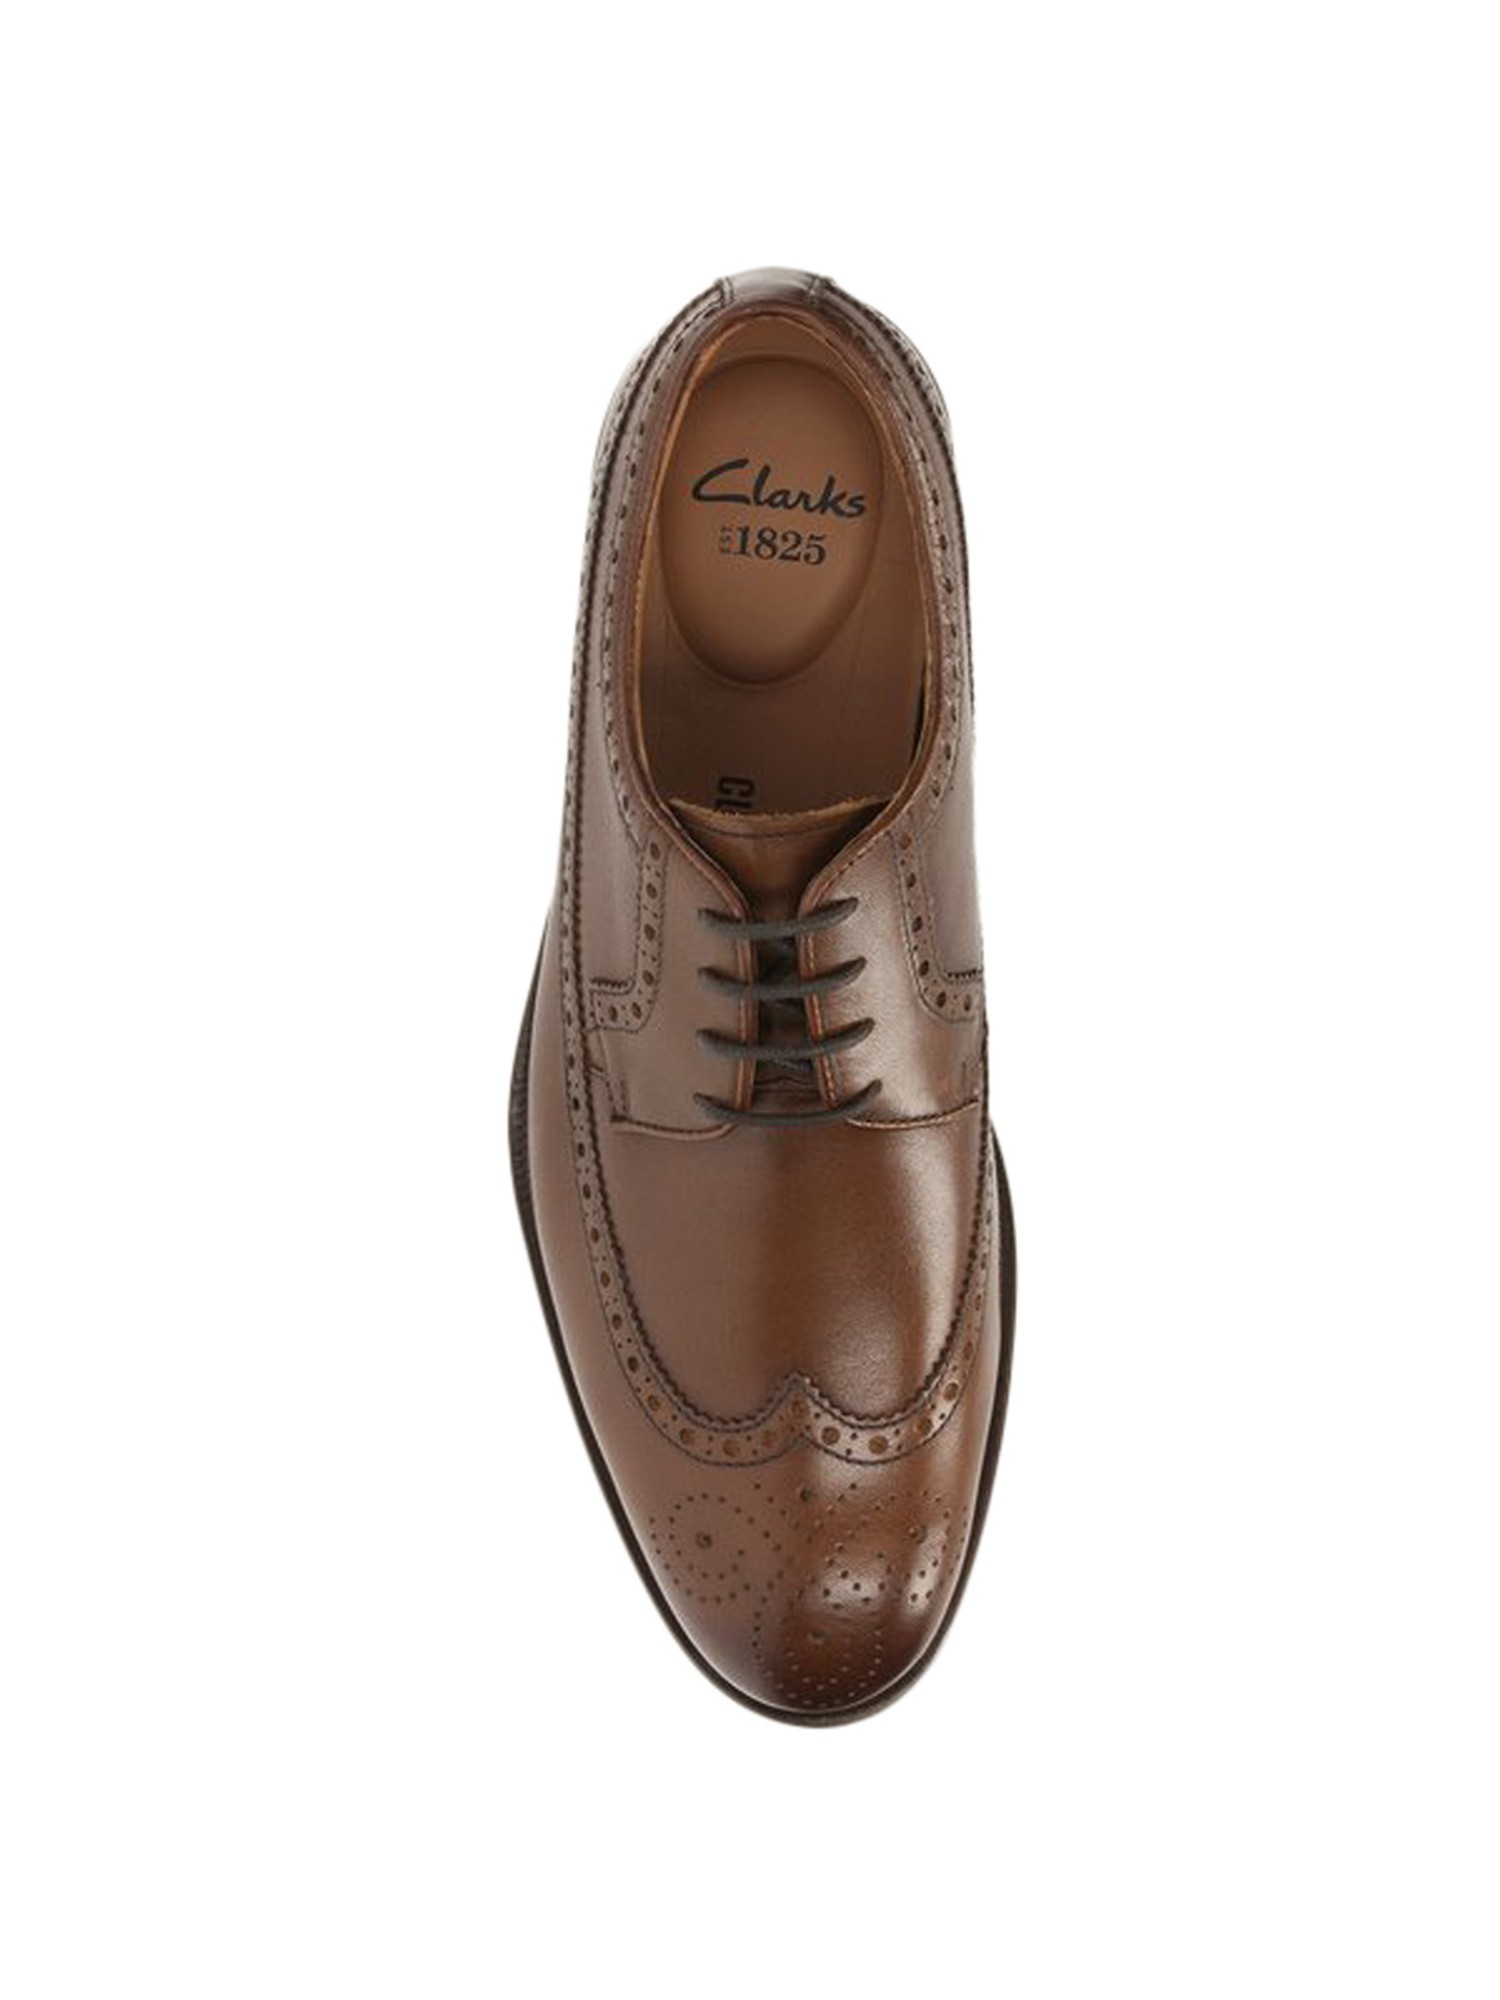 Buy Clarks Coling Limit Brown Brogue Shoes for at Best Price @ Tata CLiQ